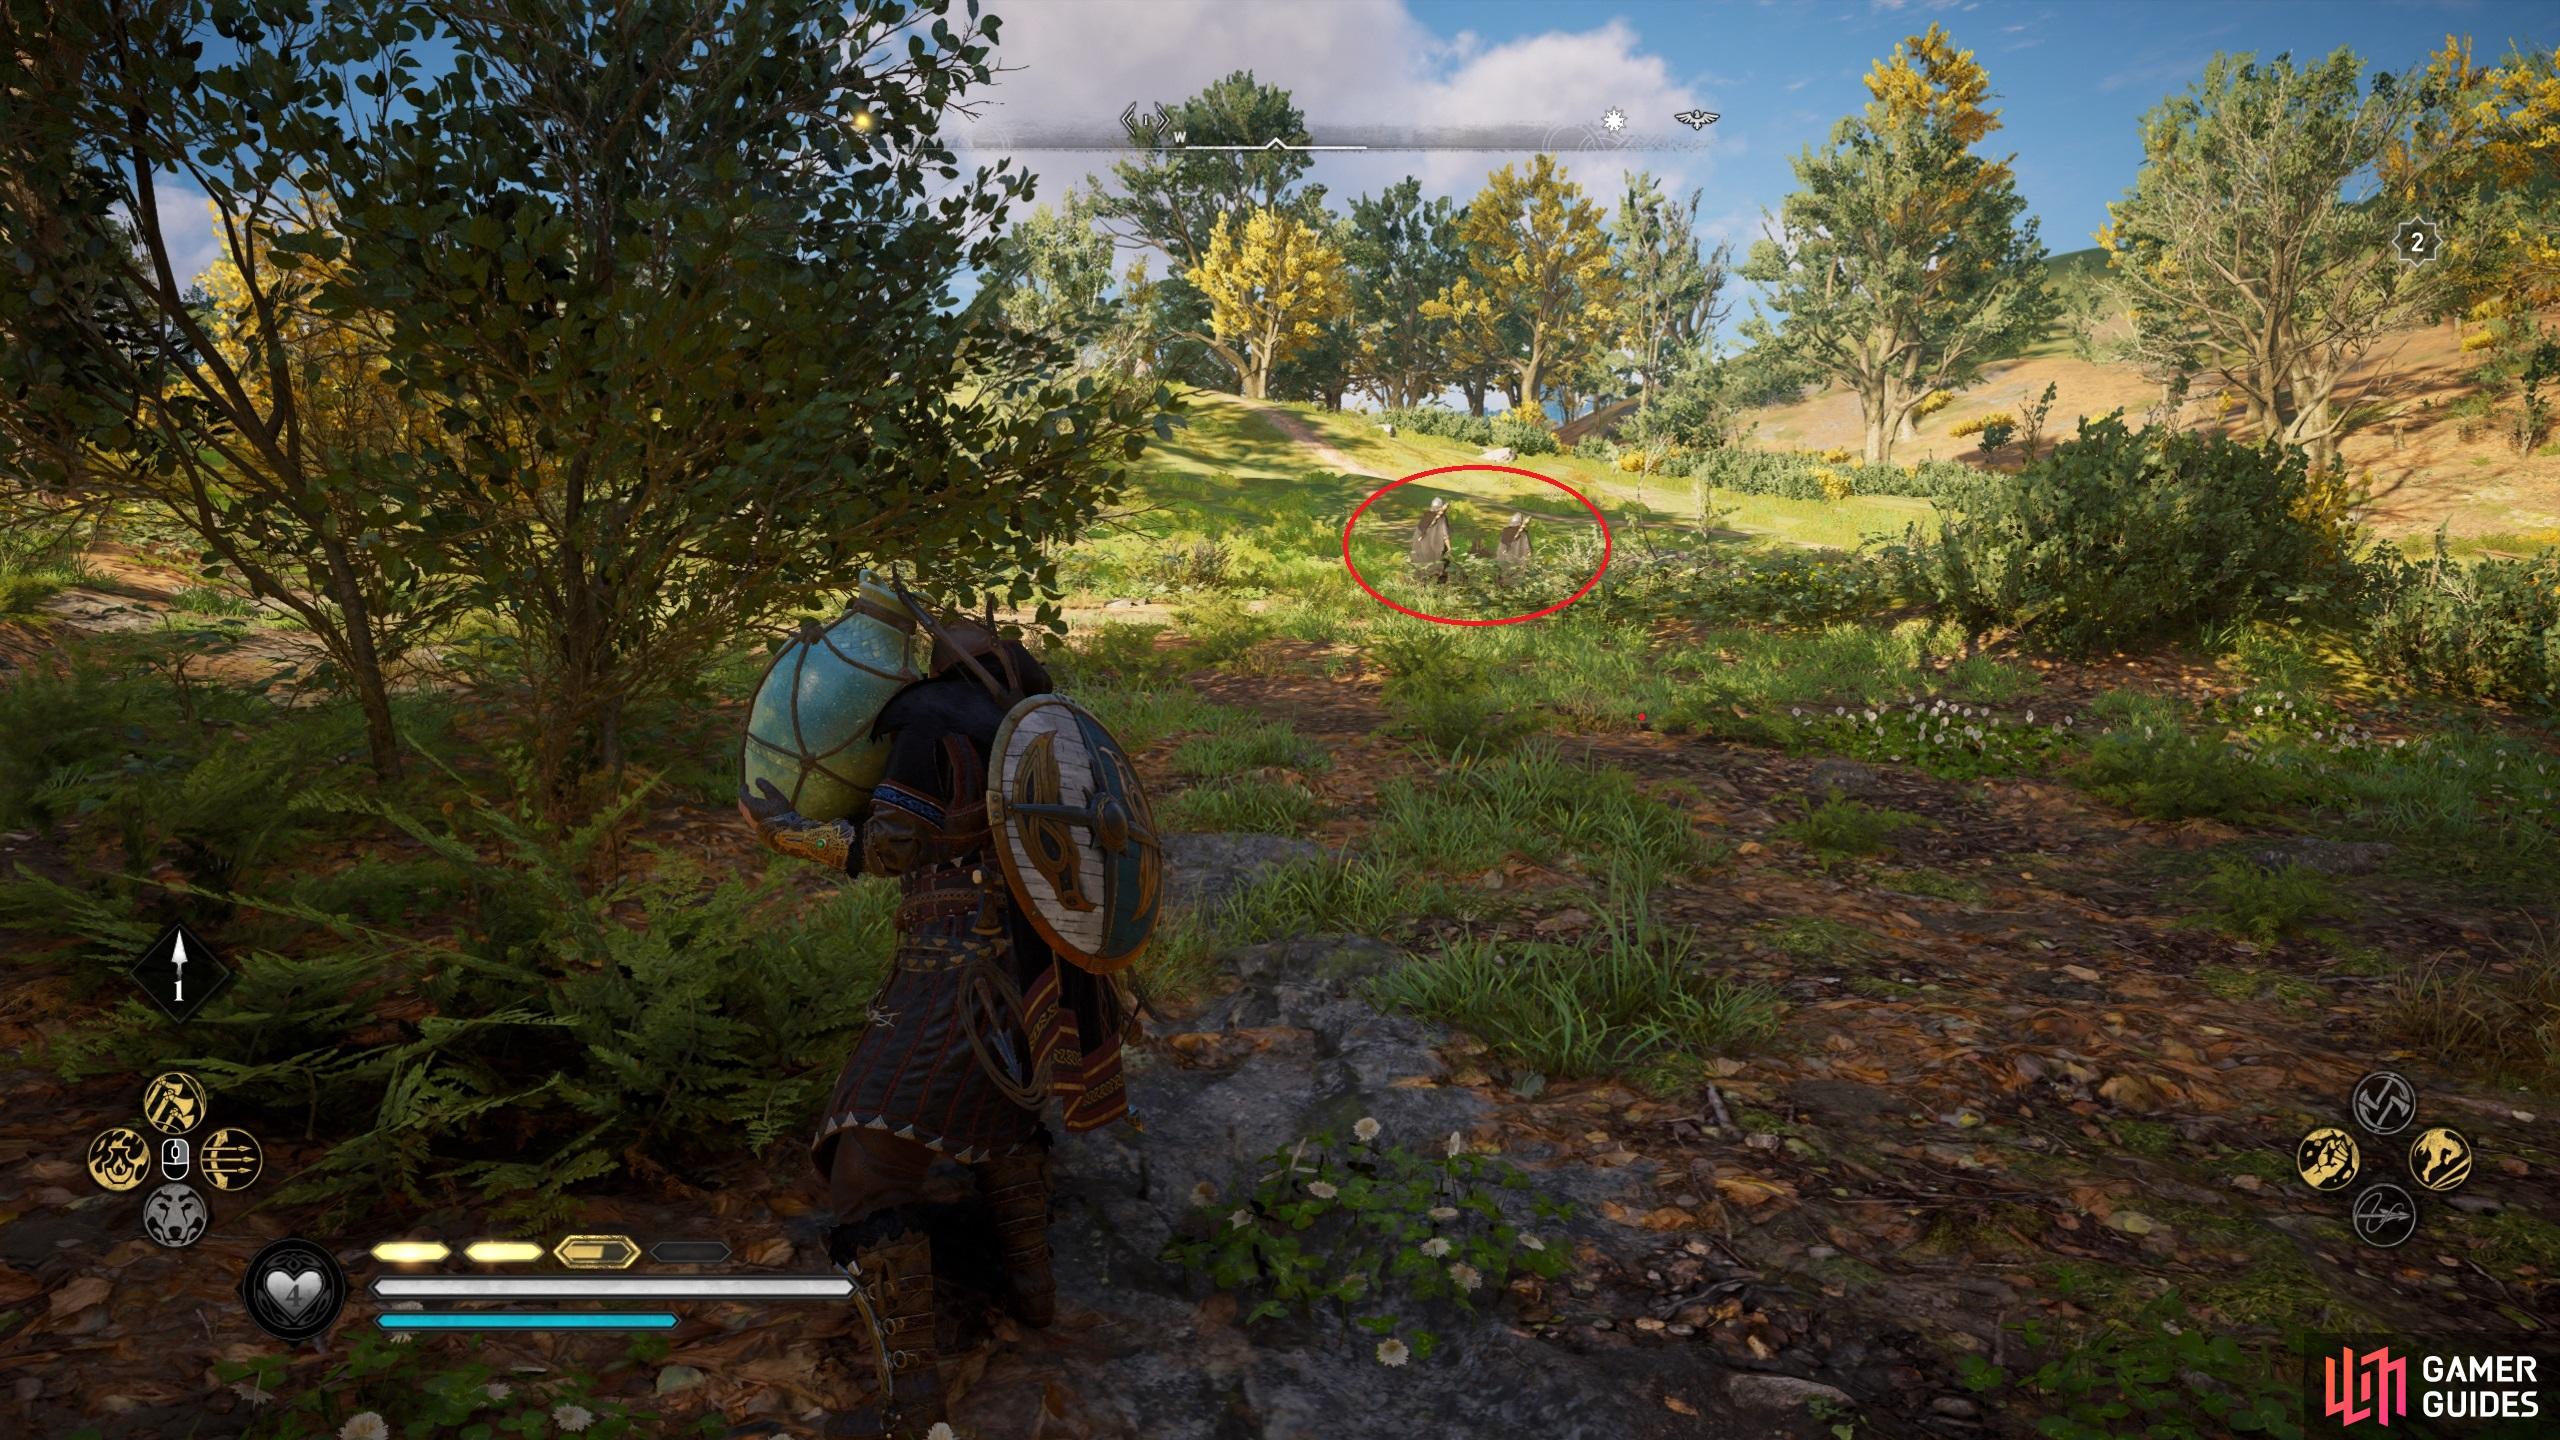 You will need to avoid bandits in the fields on your way to the hermit hut.